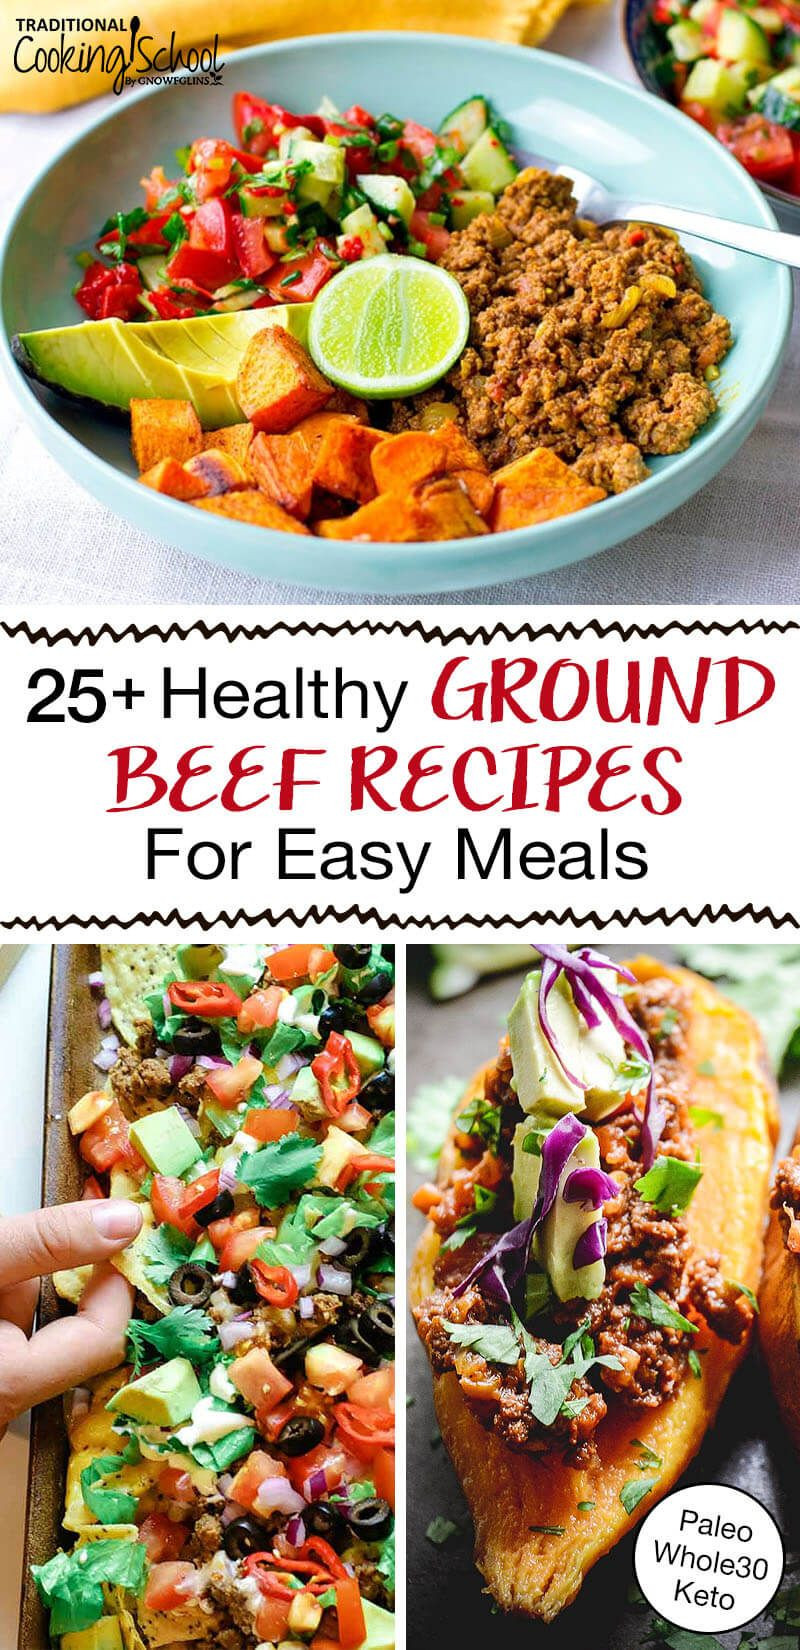 Ground Beef Recipes For Dinner Healthy Keto
 25 Healthy Ground Beef Recipes For Easy Meals Paleo